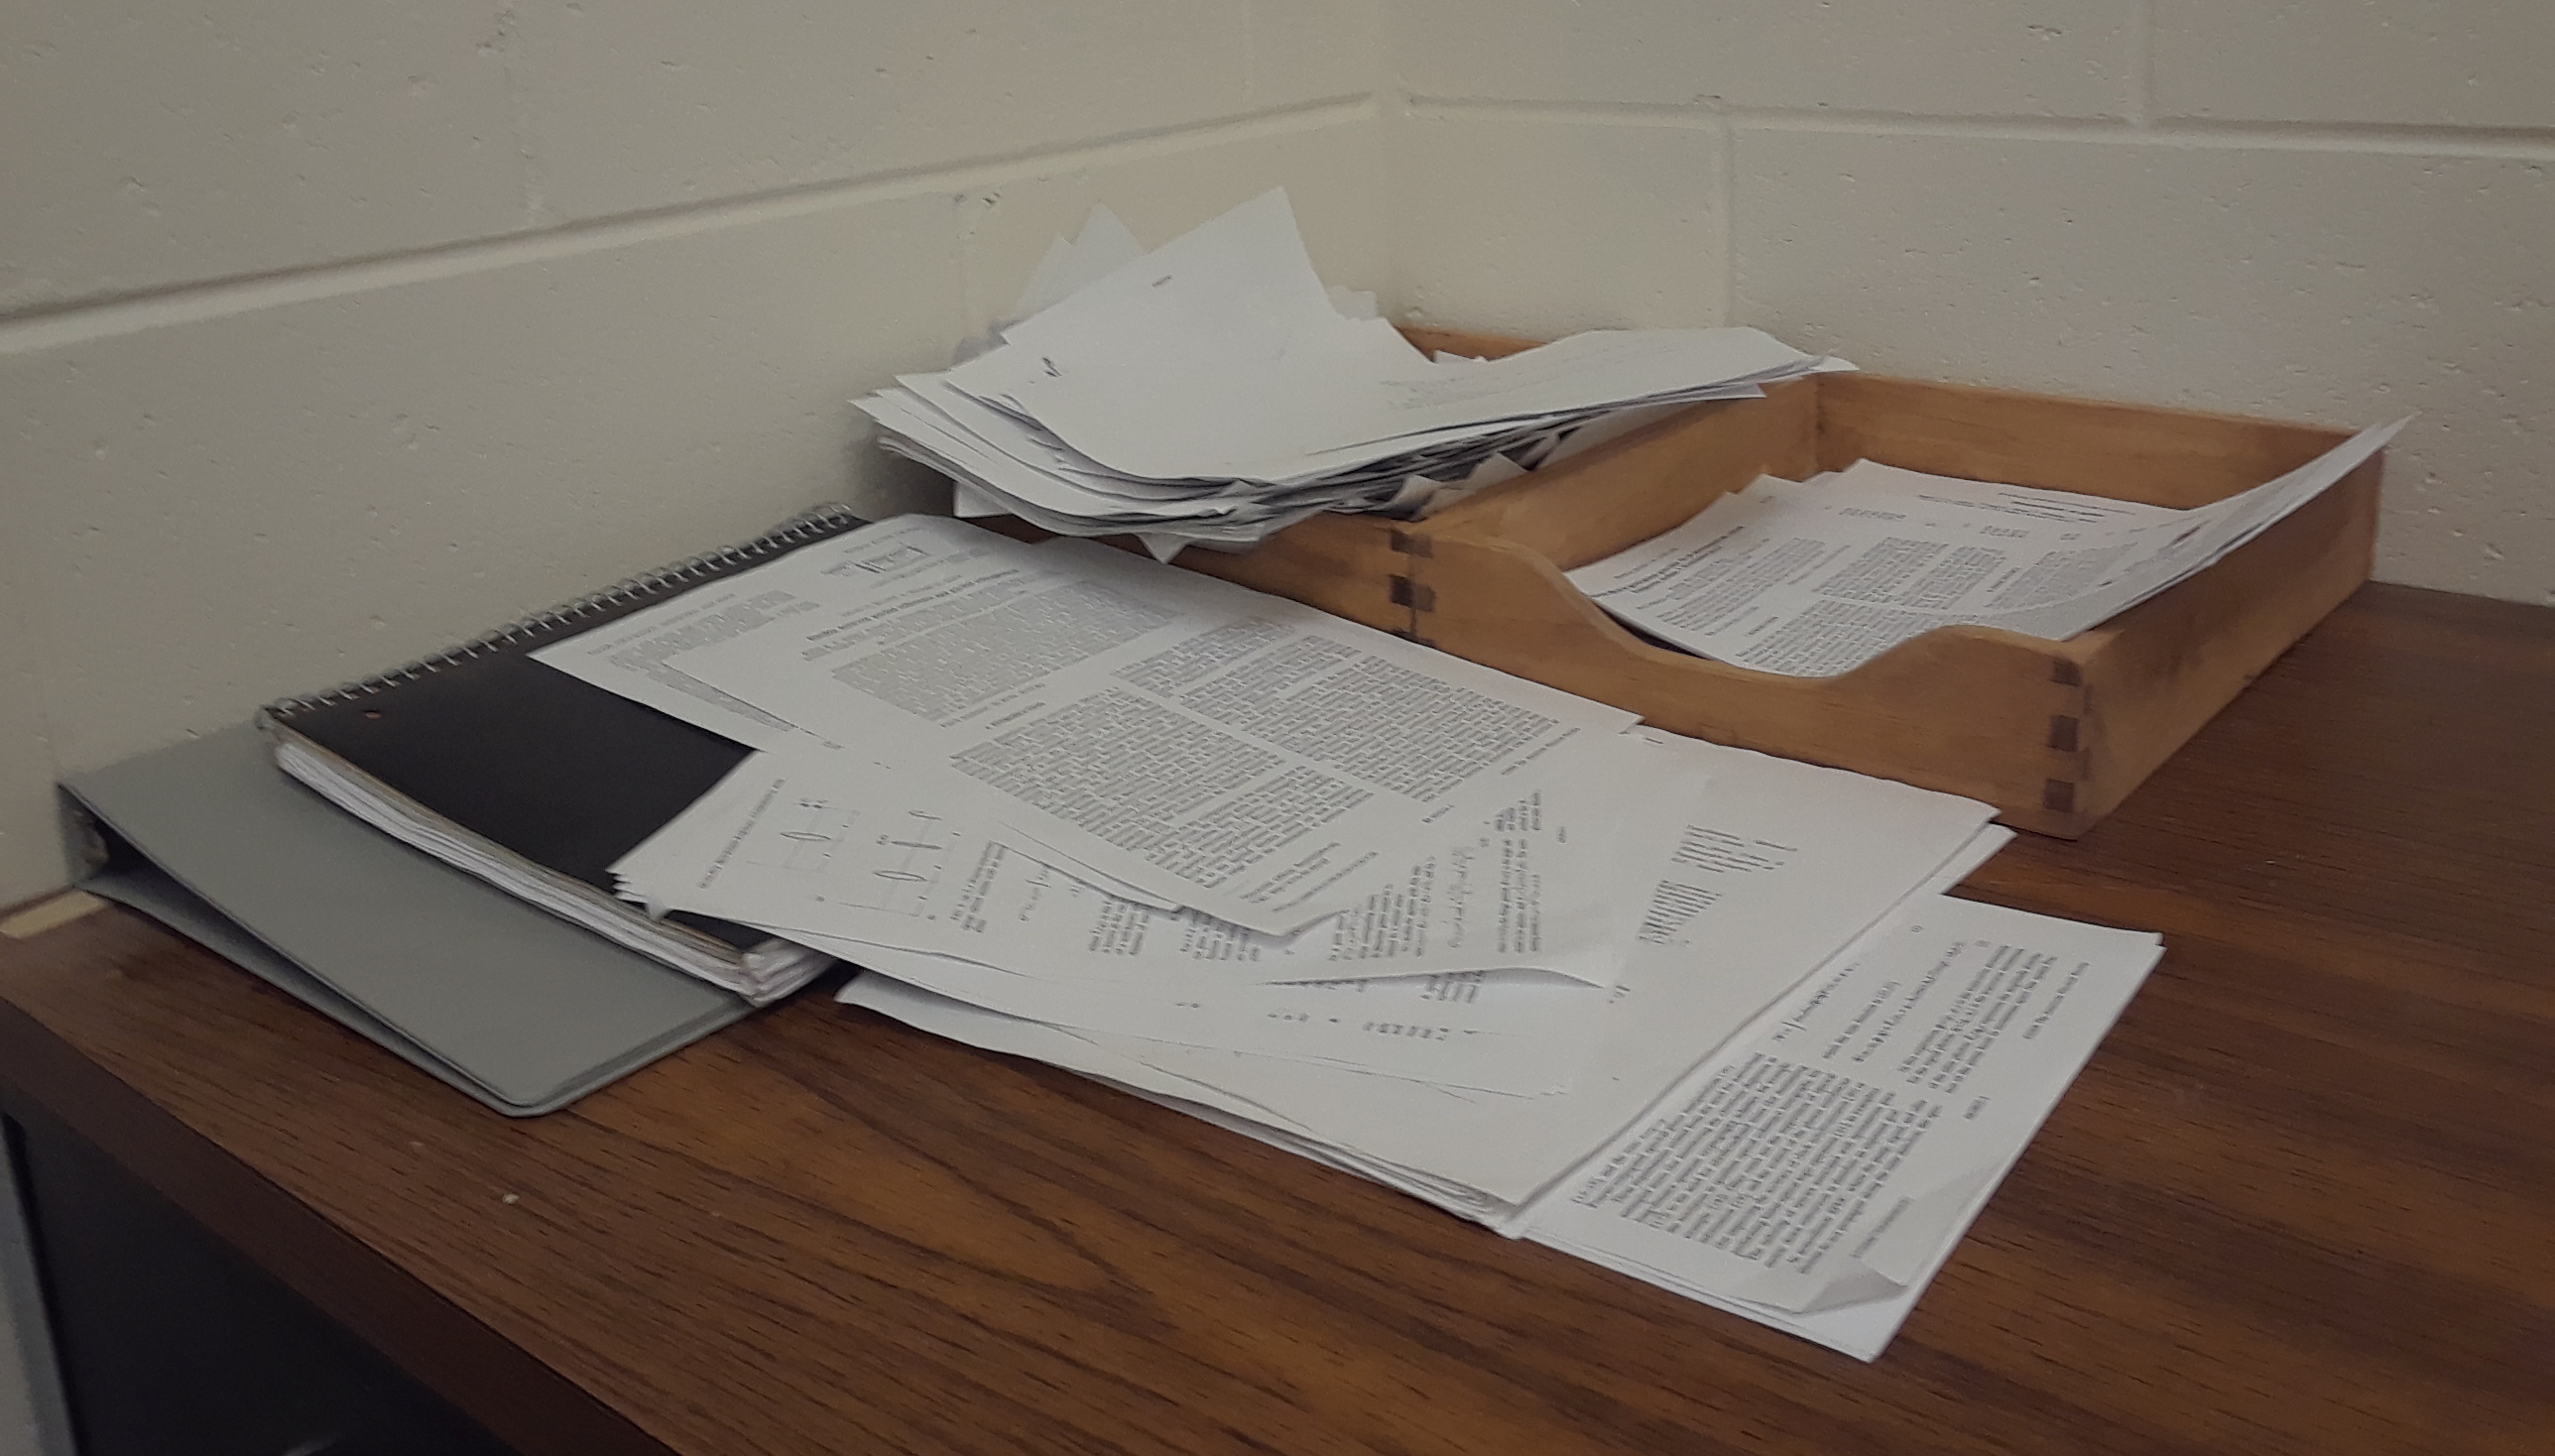 In/Outboxes in their natural habitat—my desk, strewn with papers